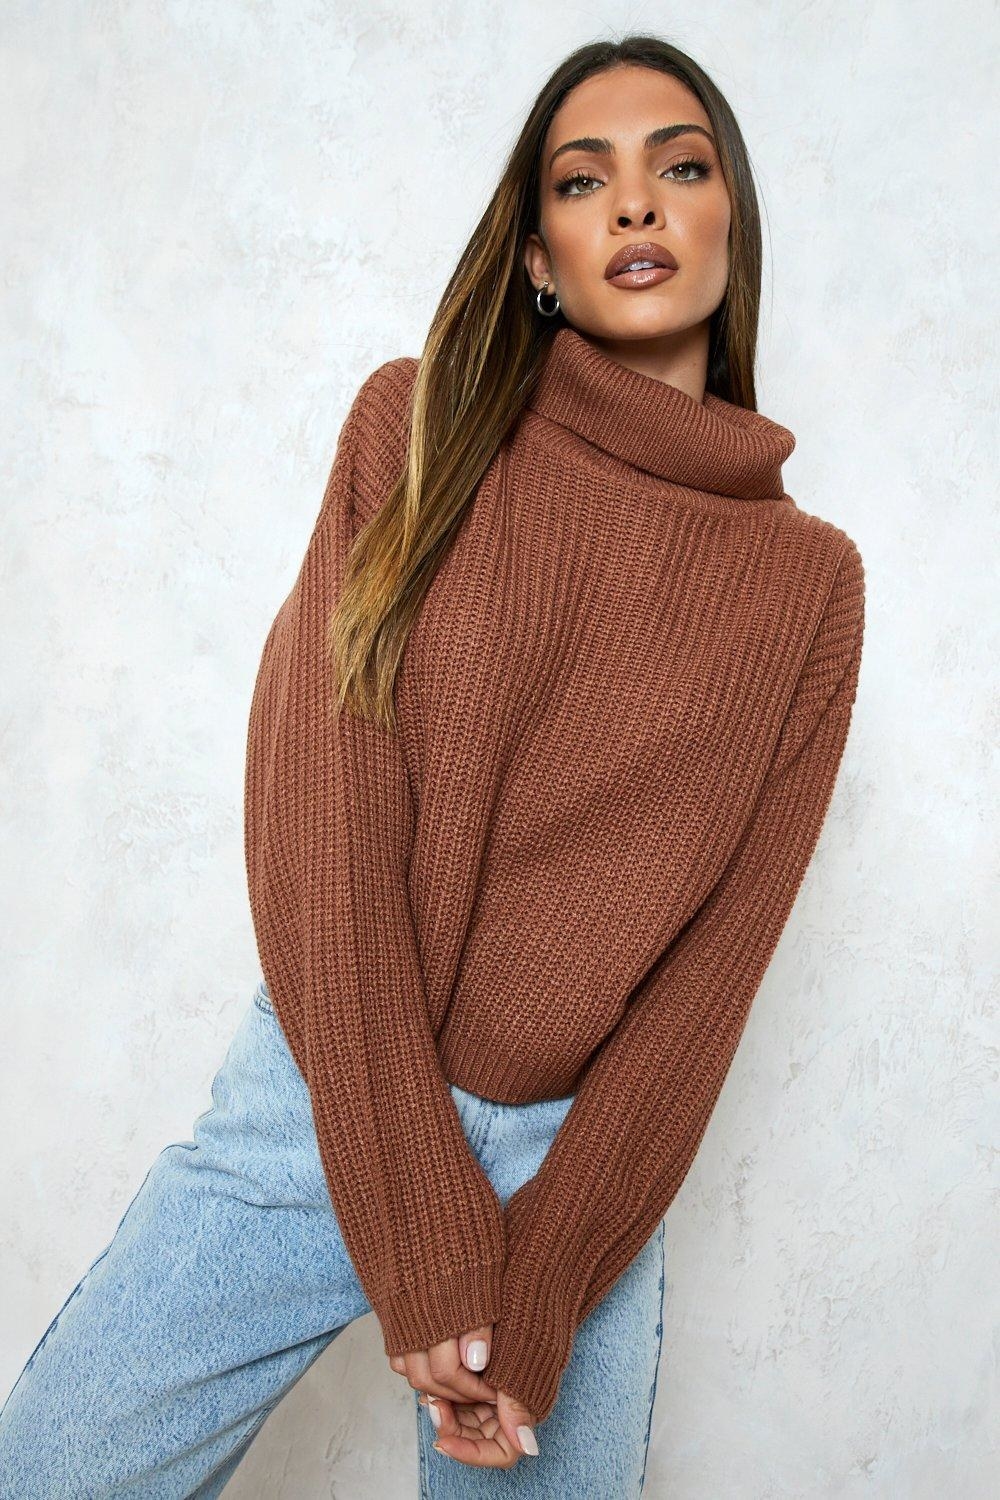 model wearing sweater with a slightly loose fit